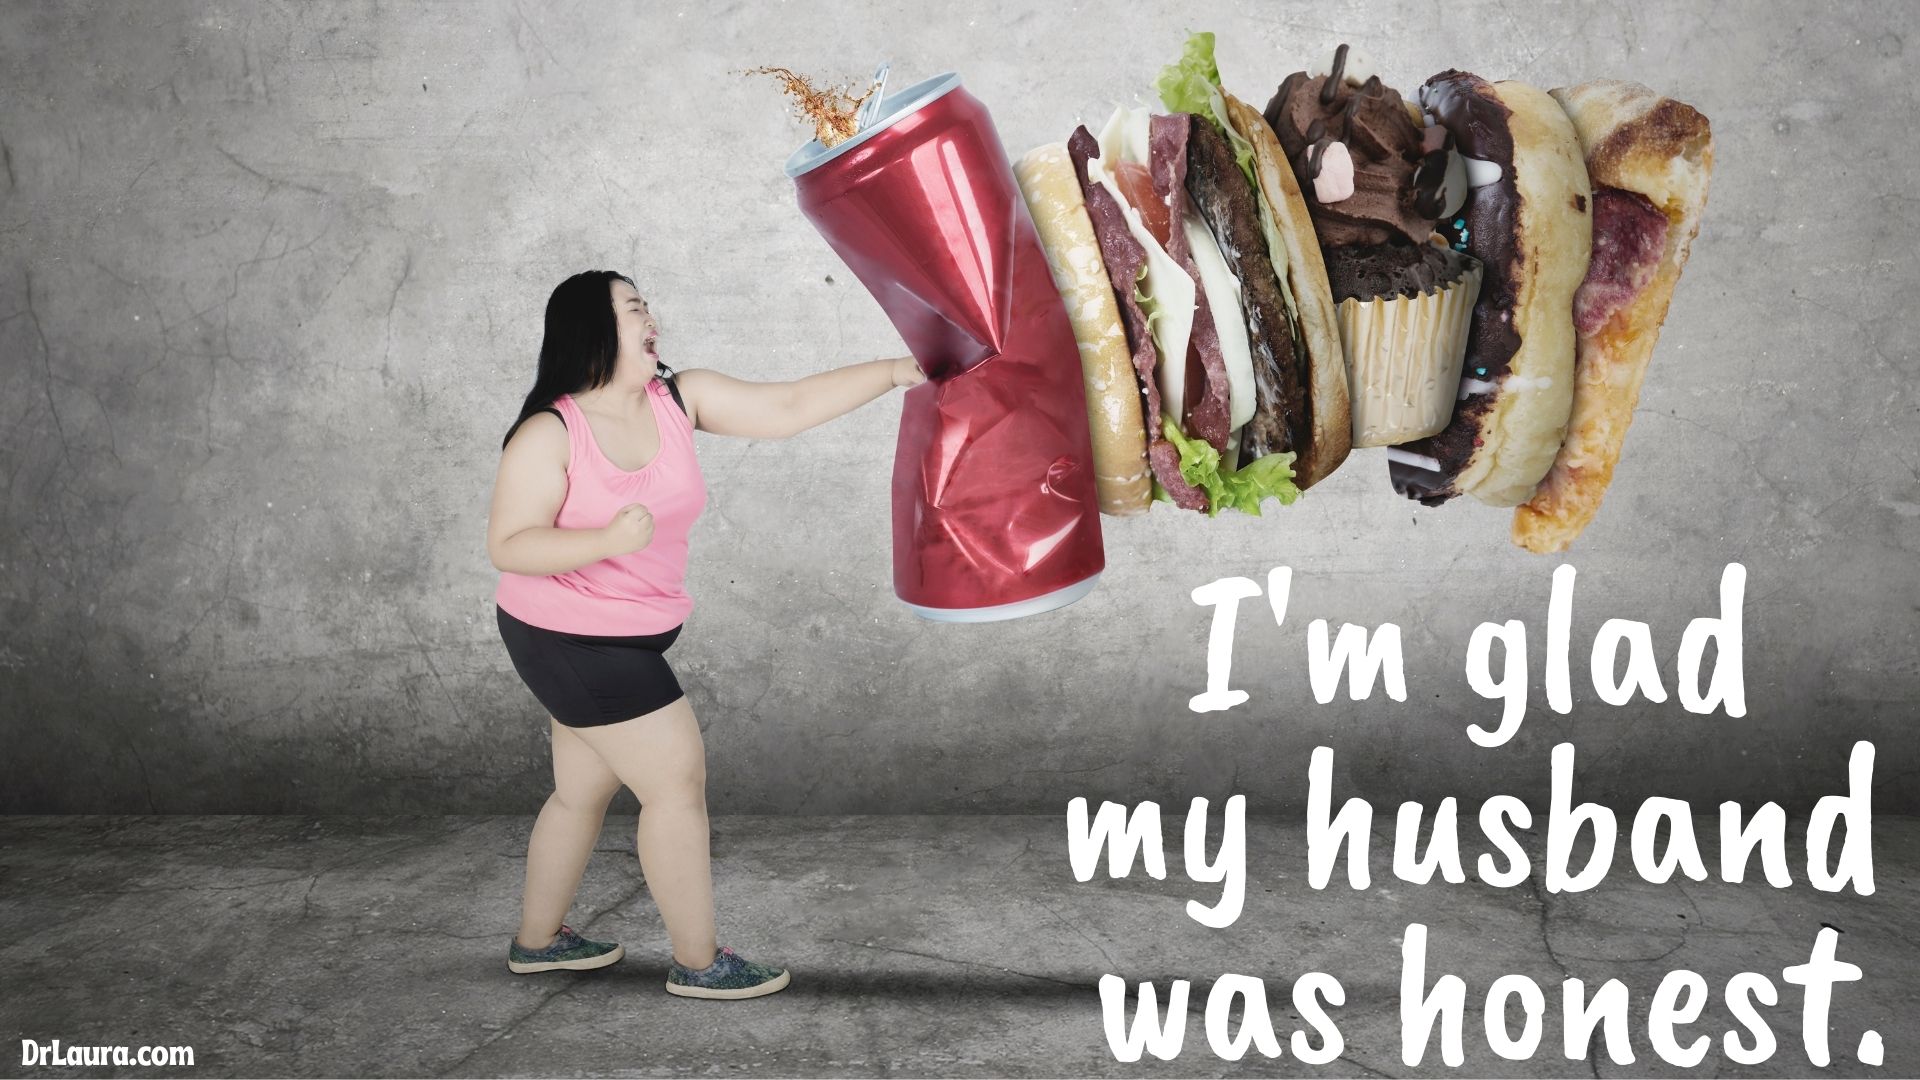 My Husband Thought I was Fat